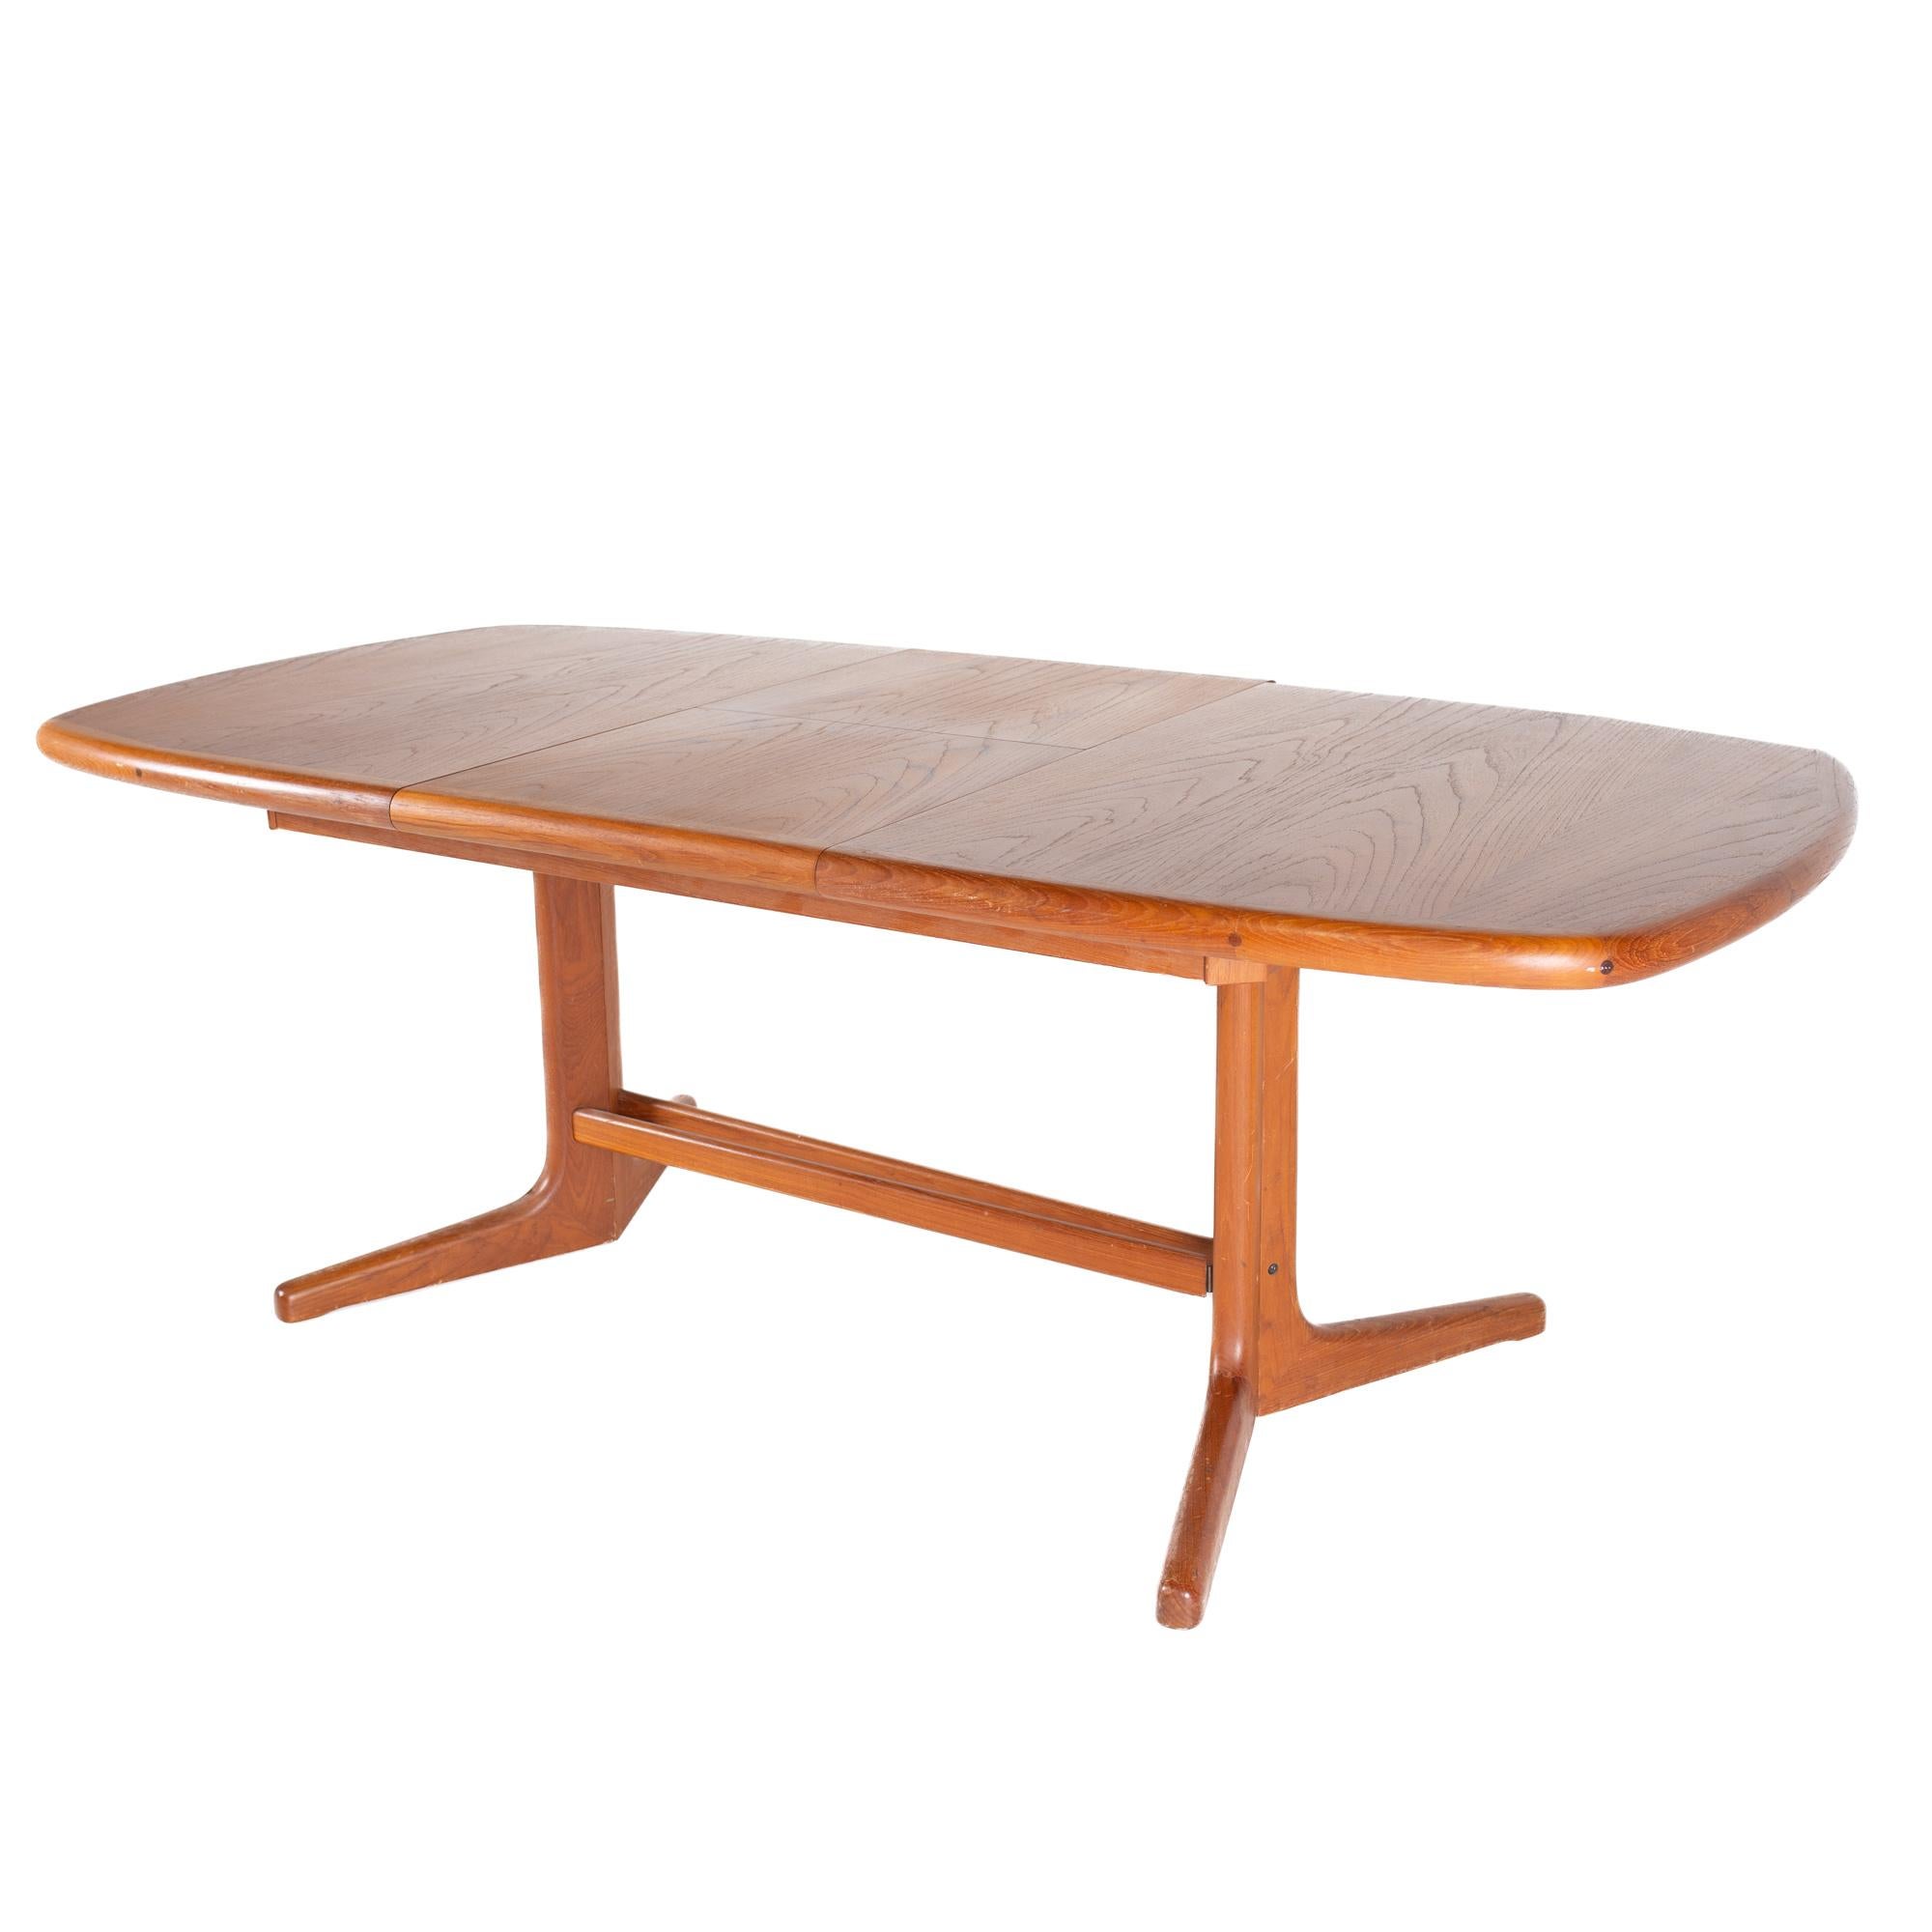 Dyrlund Style Mid Century Teak Hidden Leaf Dining Table In Good Condition For Sale In Countryside, IL